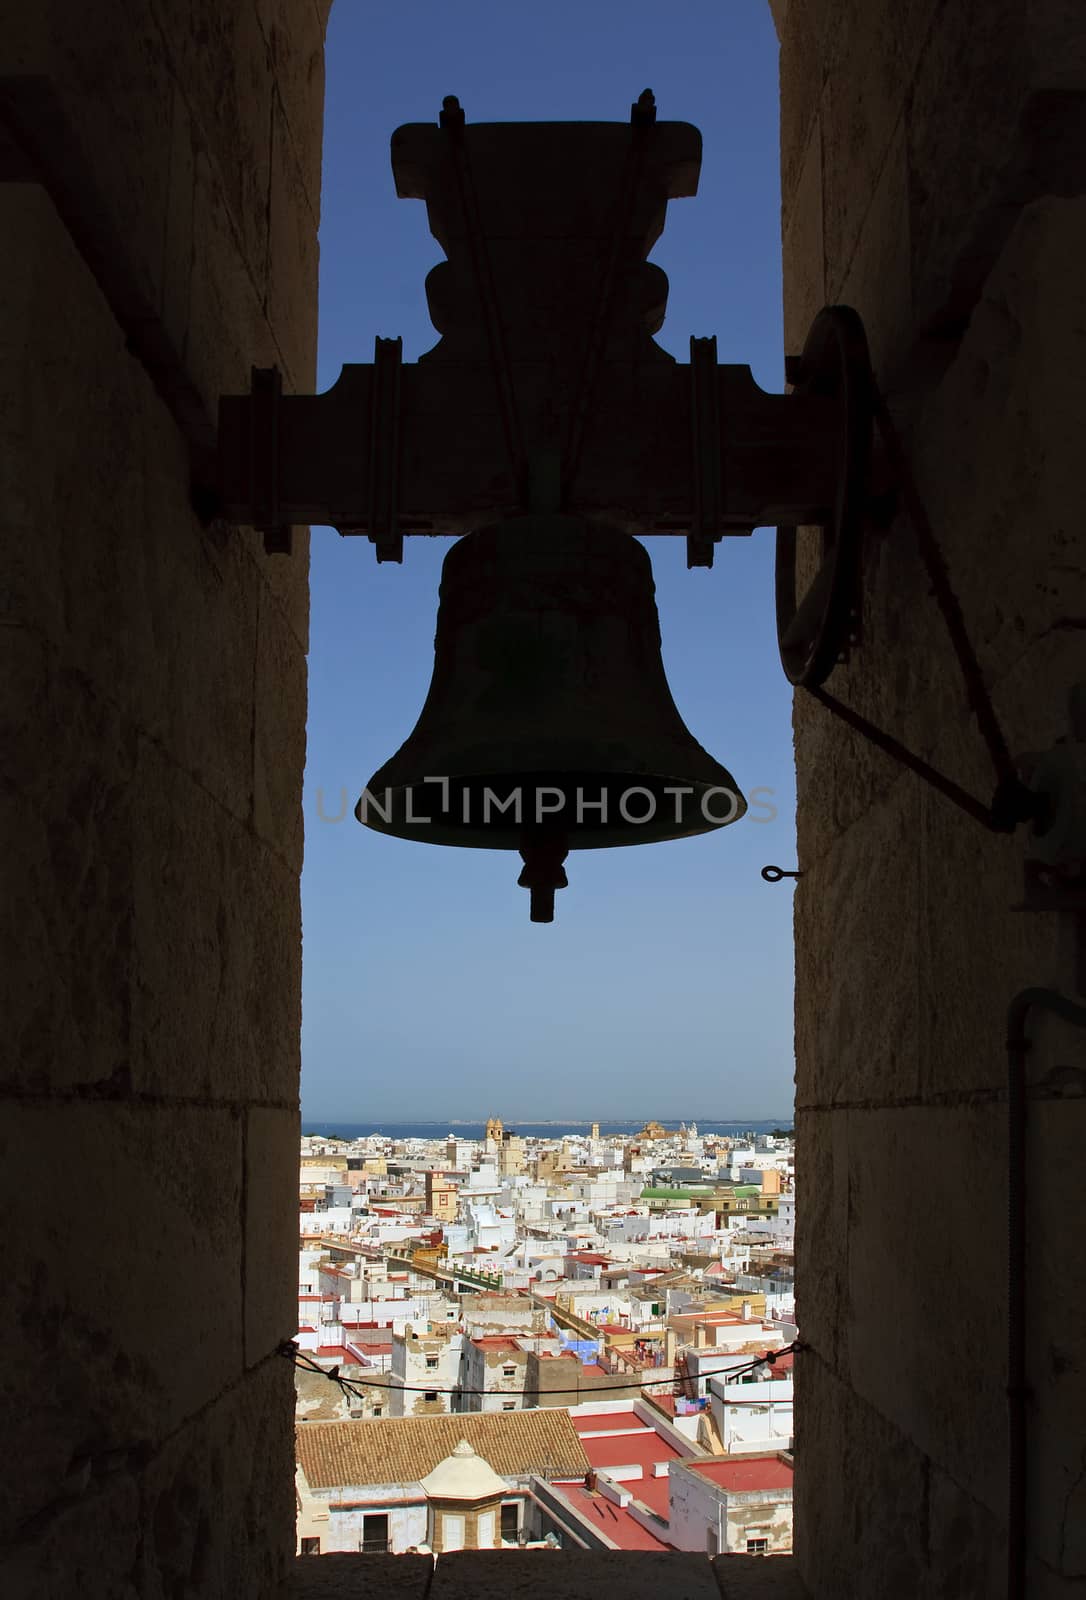 The city of Cadiz viewed from the belfry in the Poniente (west) tower of Cadiz cathedral.  The Catedral de Santa Cruz de Cadiz is a Roman Catholic church in Cadiz, southern Spain.